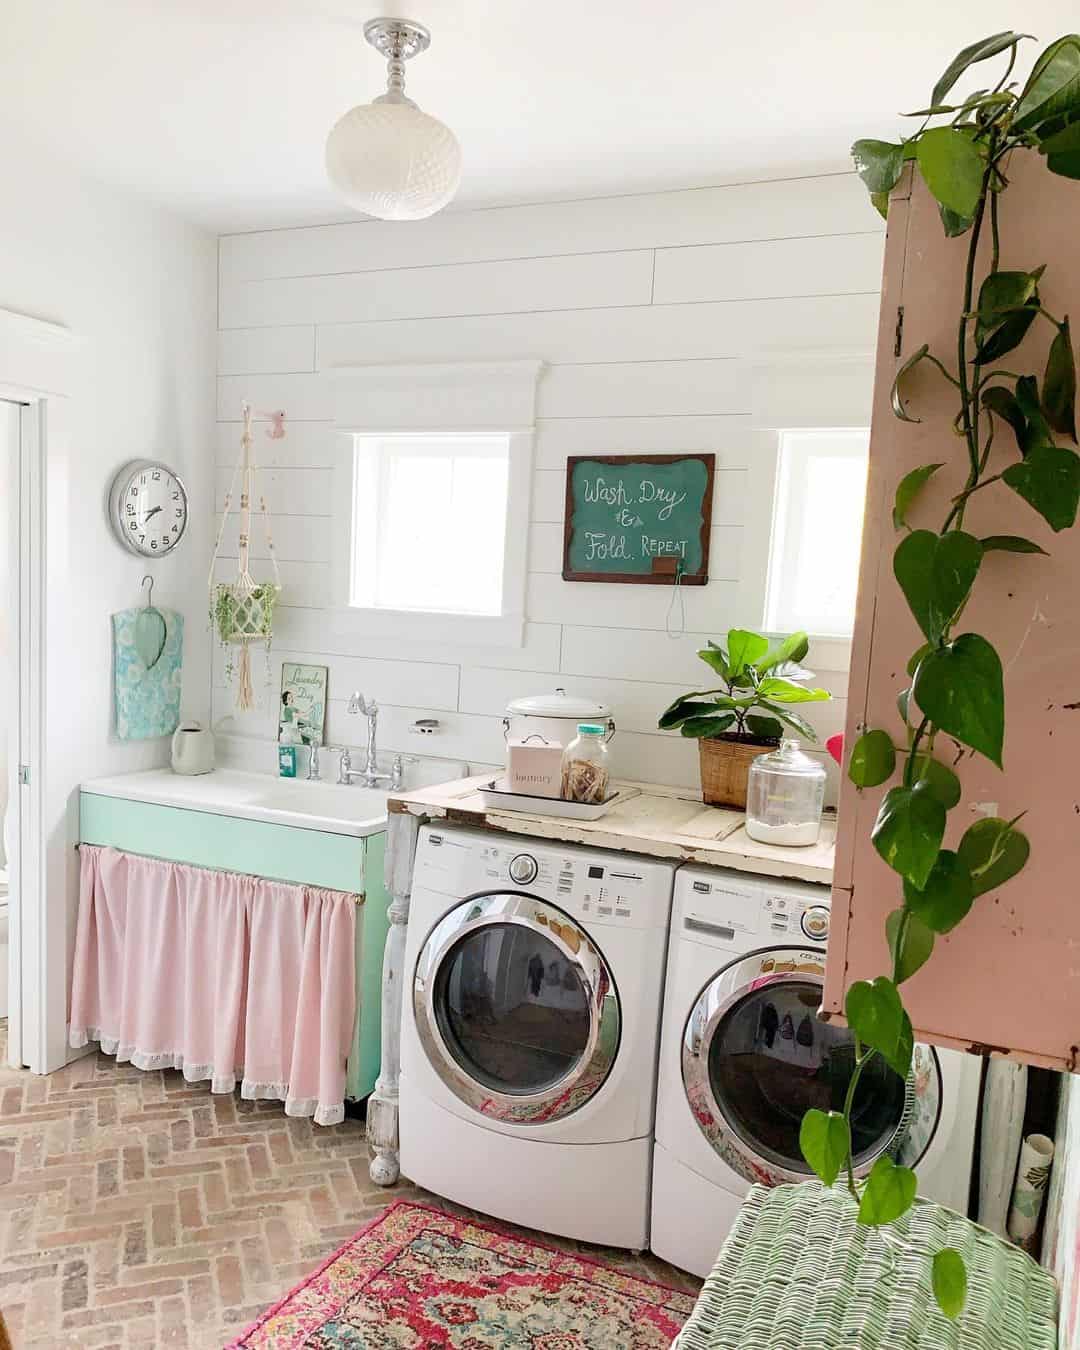 Colorful Laundry Room With Homey Touches - Soul & Lane